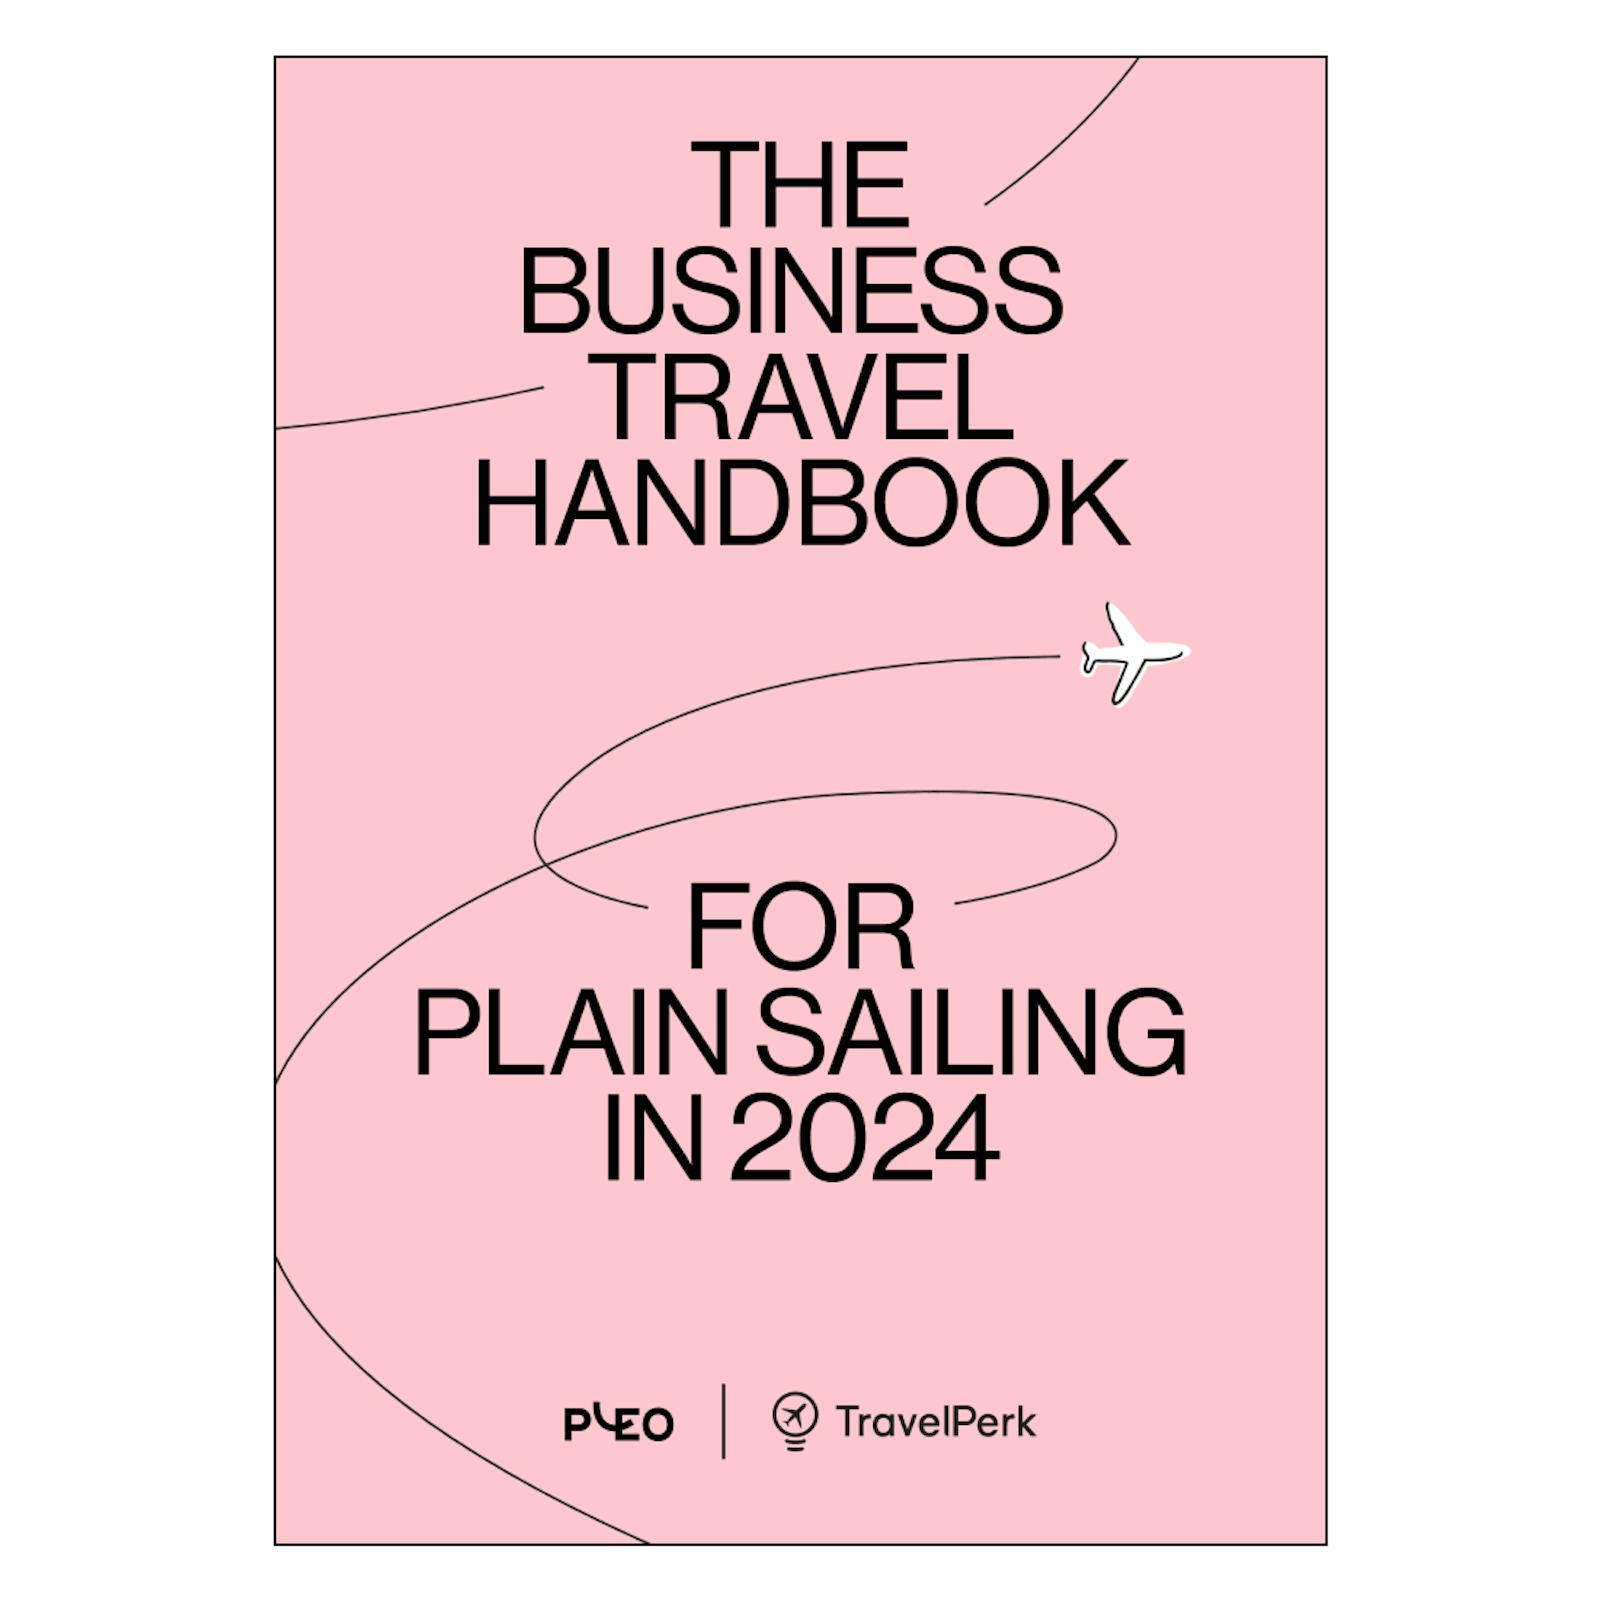 Cover image for the business travel handbook for plain sailing in 2024